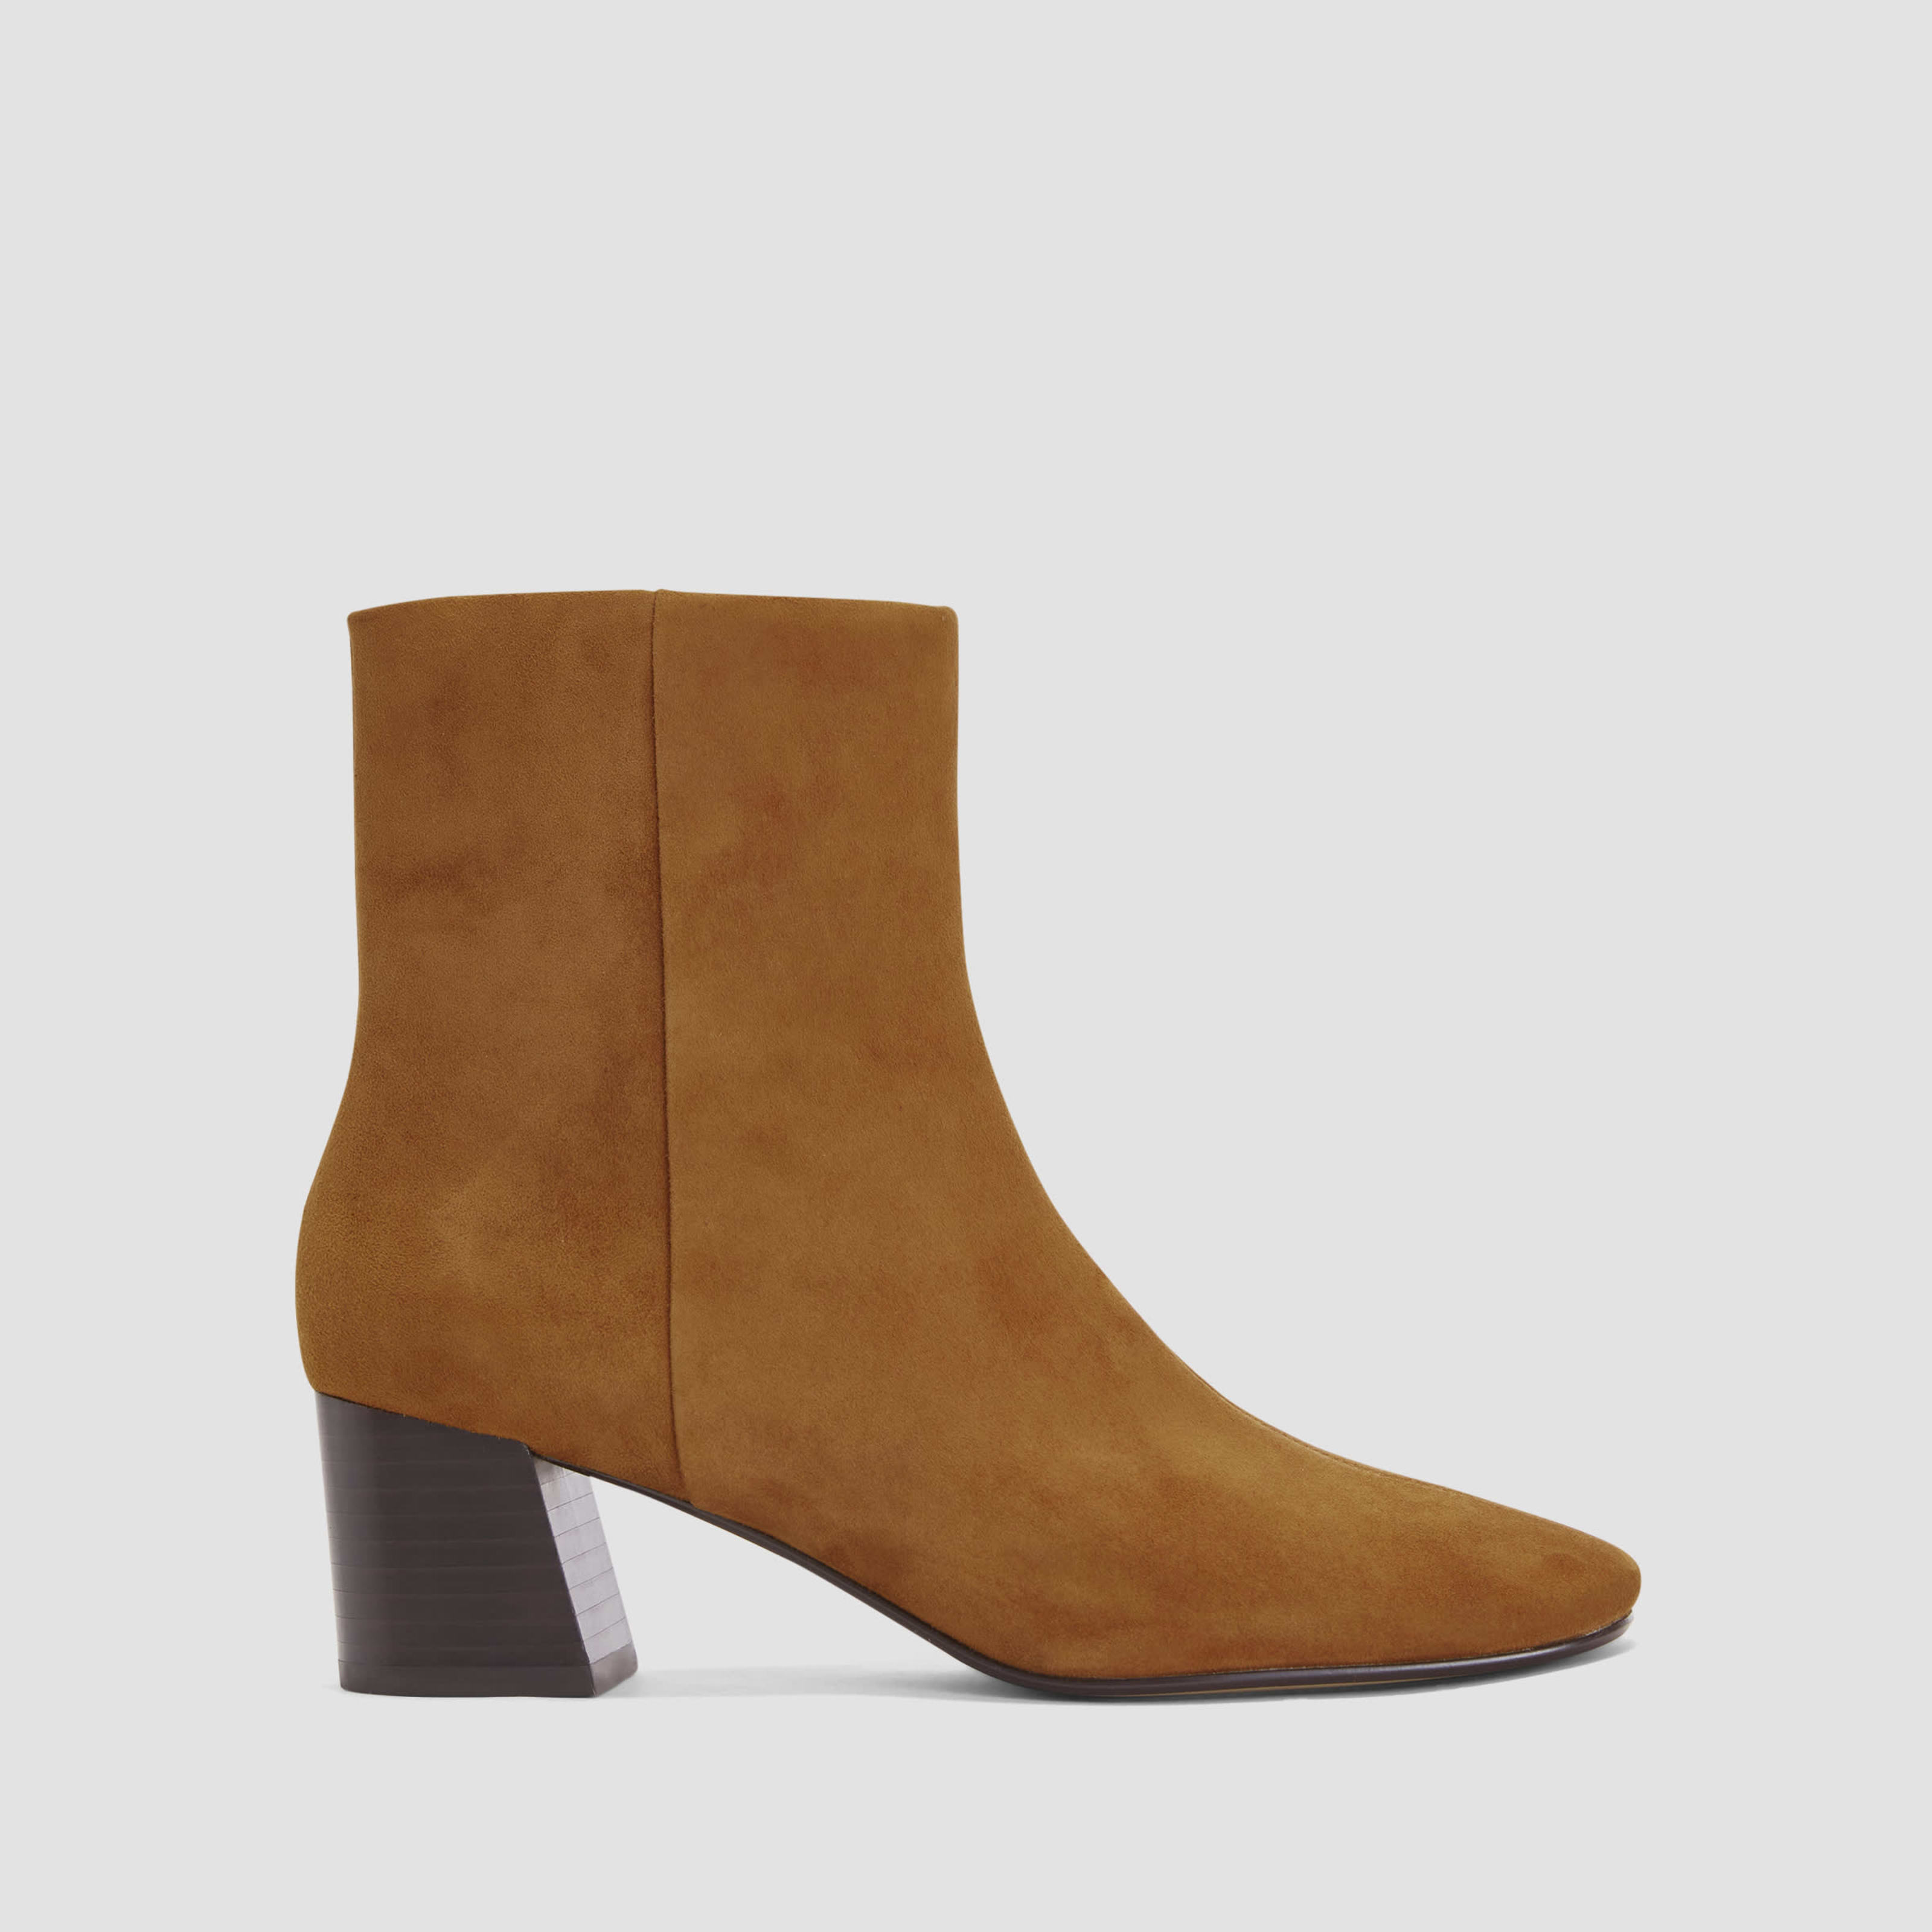 chelsea boot by everlane in almond suede, size 5